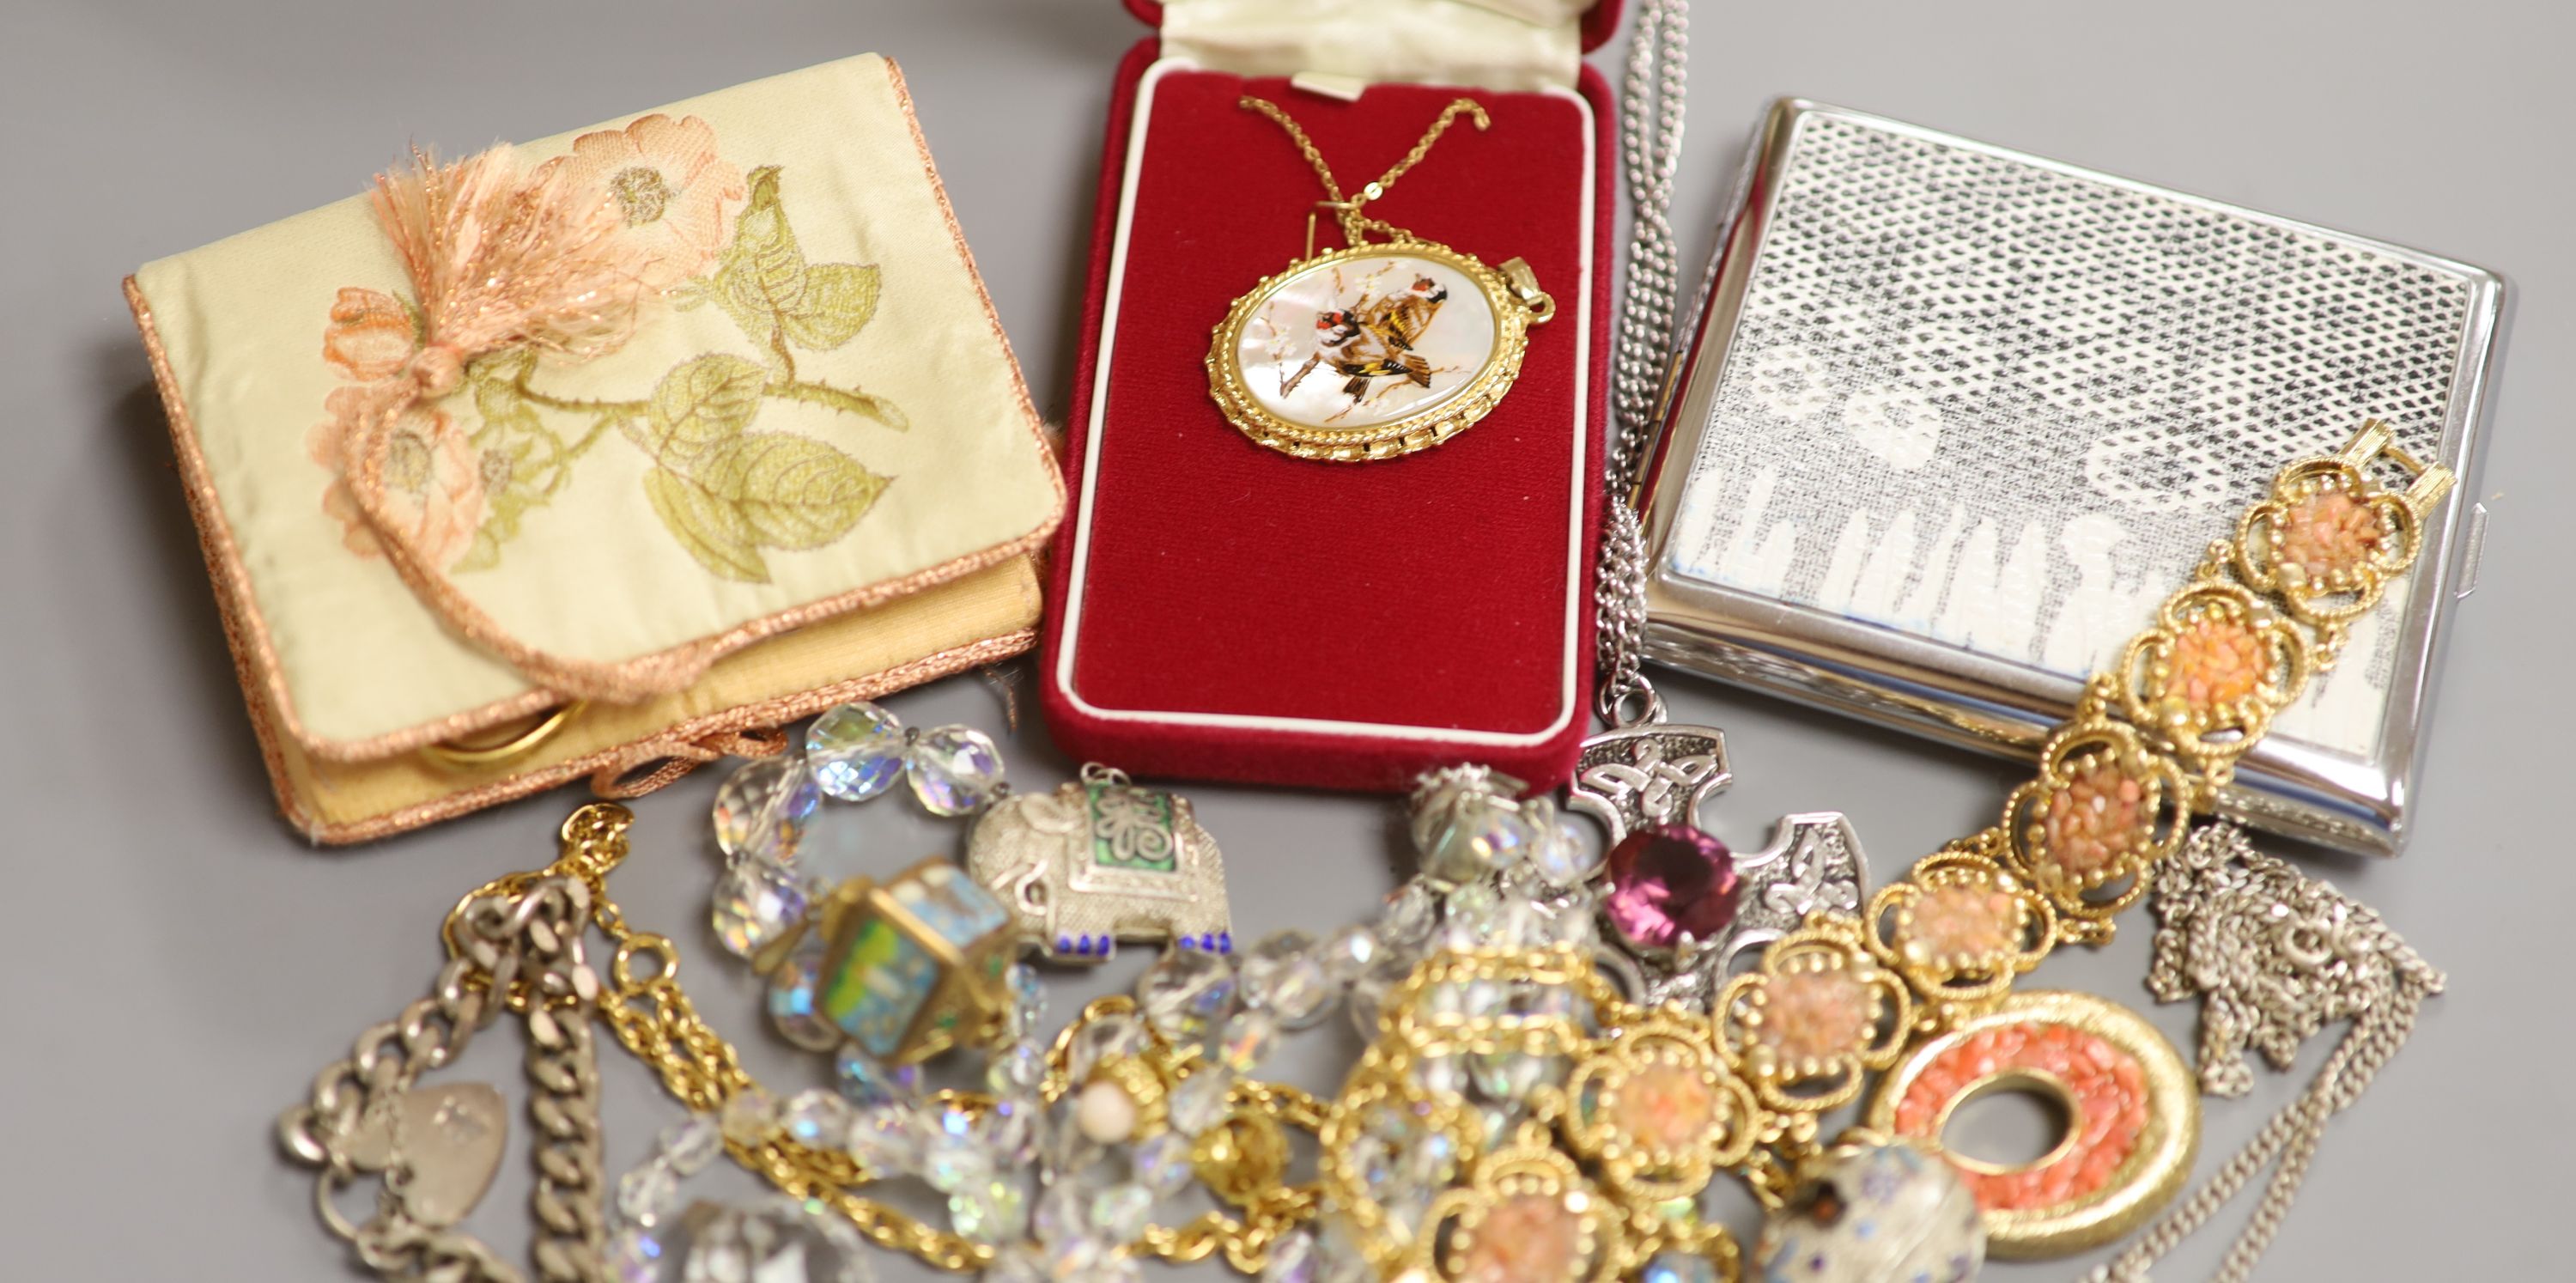 Mixed jewellery including silver bracelet, costume jewellery and a cigarette case.